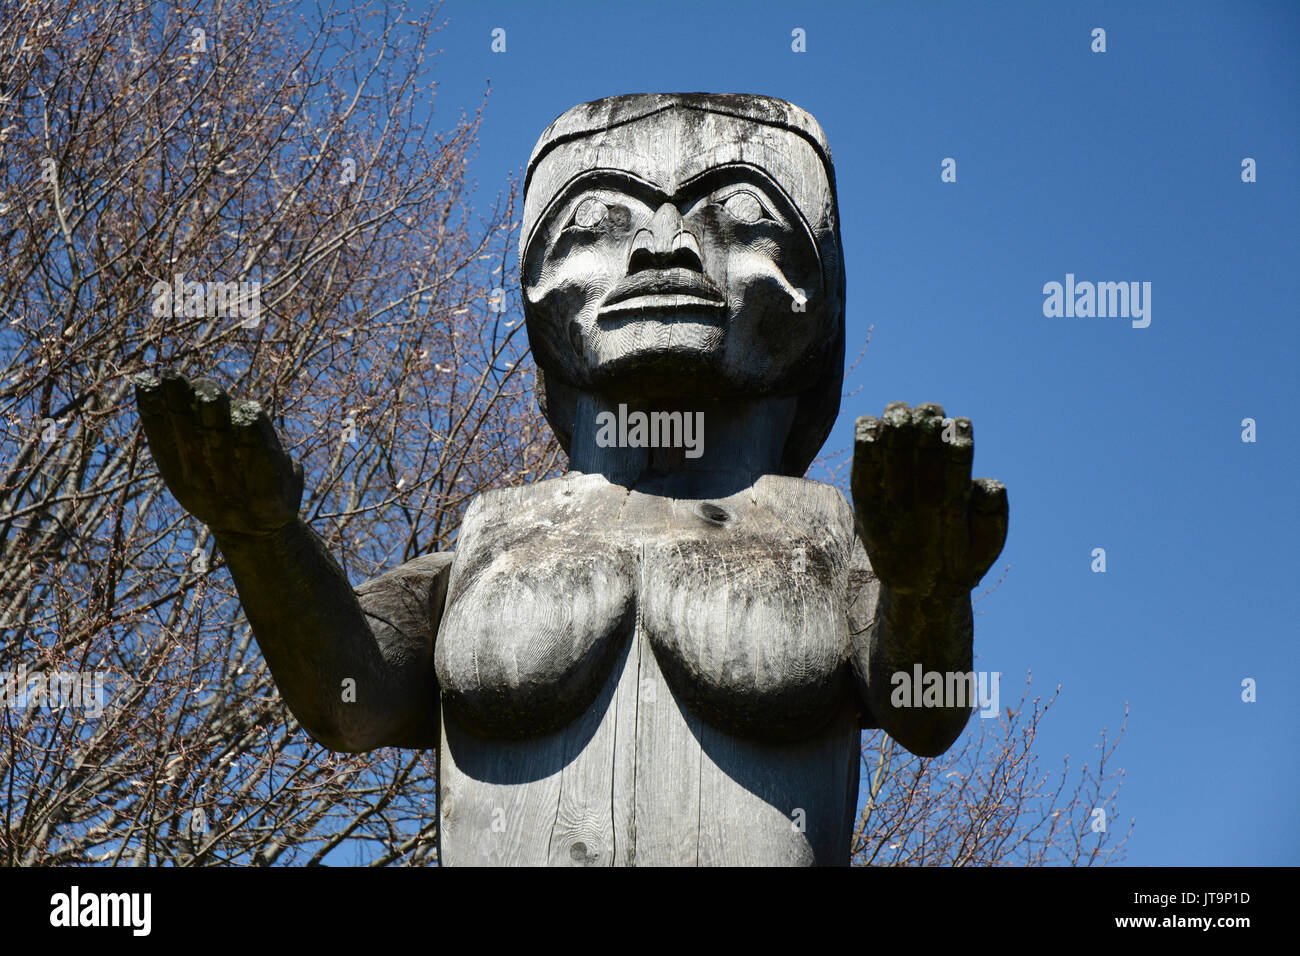 A Nuu-chah-nulth First Nation wood carving and statue of an indigenous woman in Port Alberni, Vancouver Island, British Columbia, Canada. Stock Photo